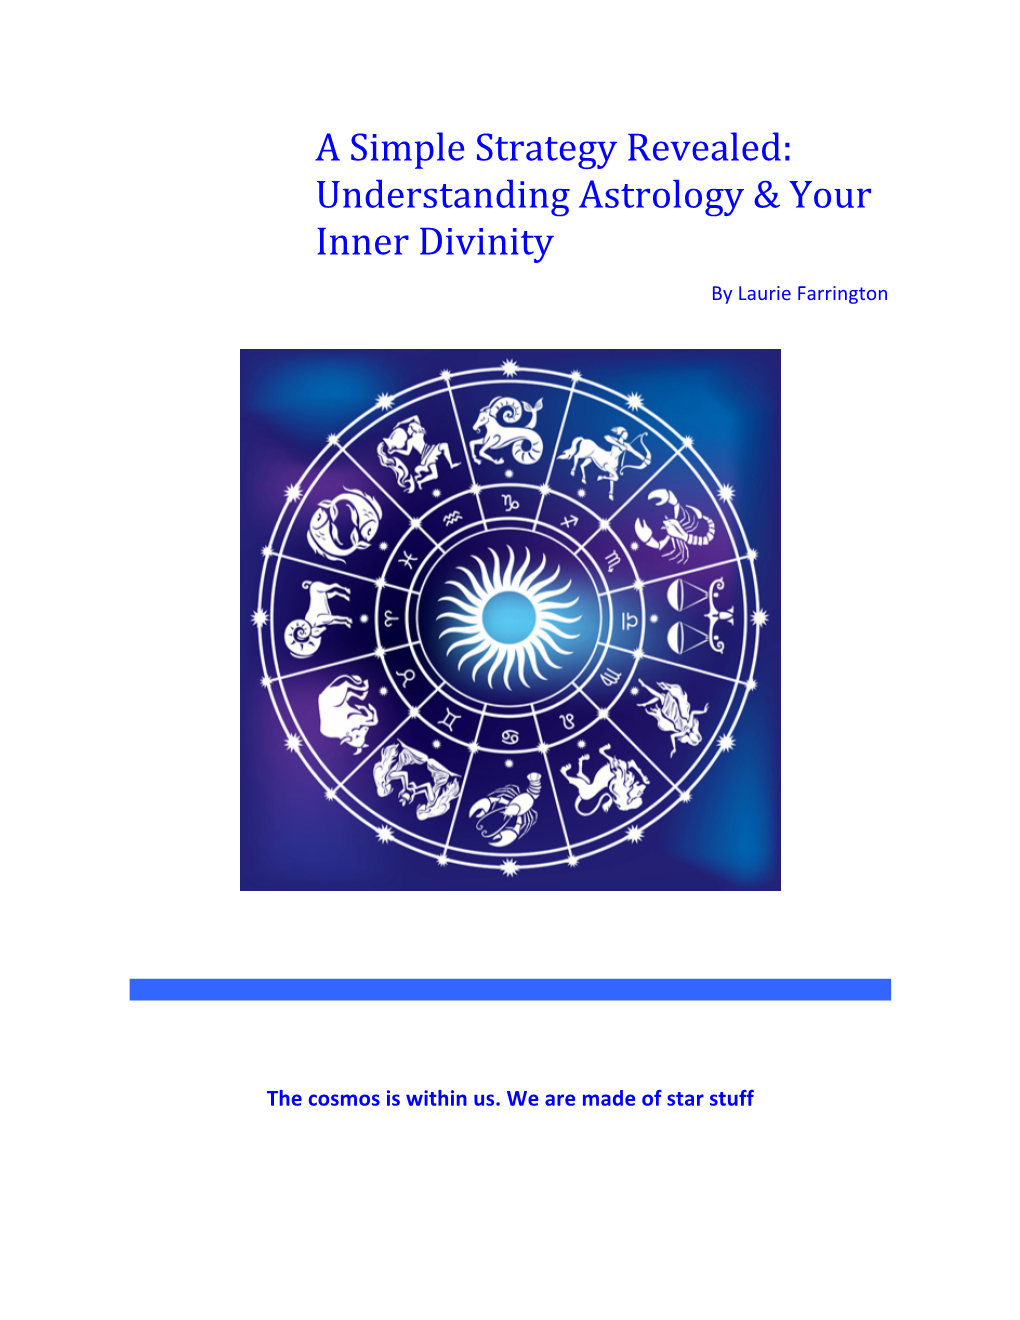 A Simple Strategy Revealed: Understanding Astrology & Your